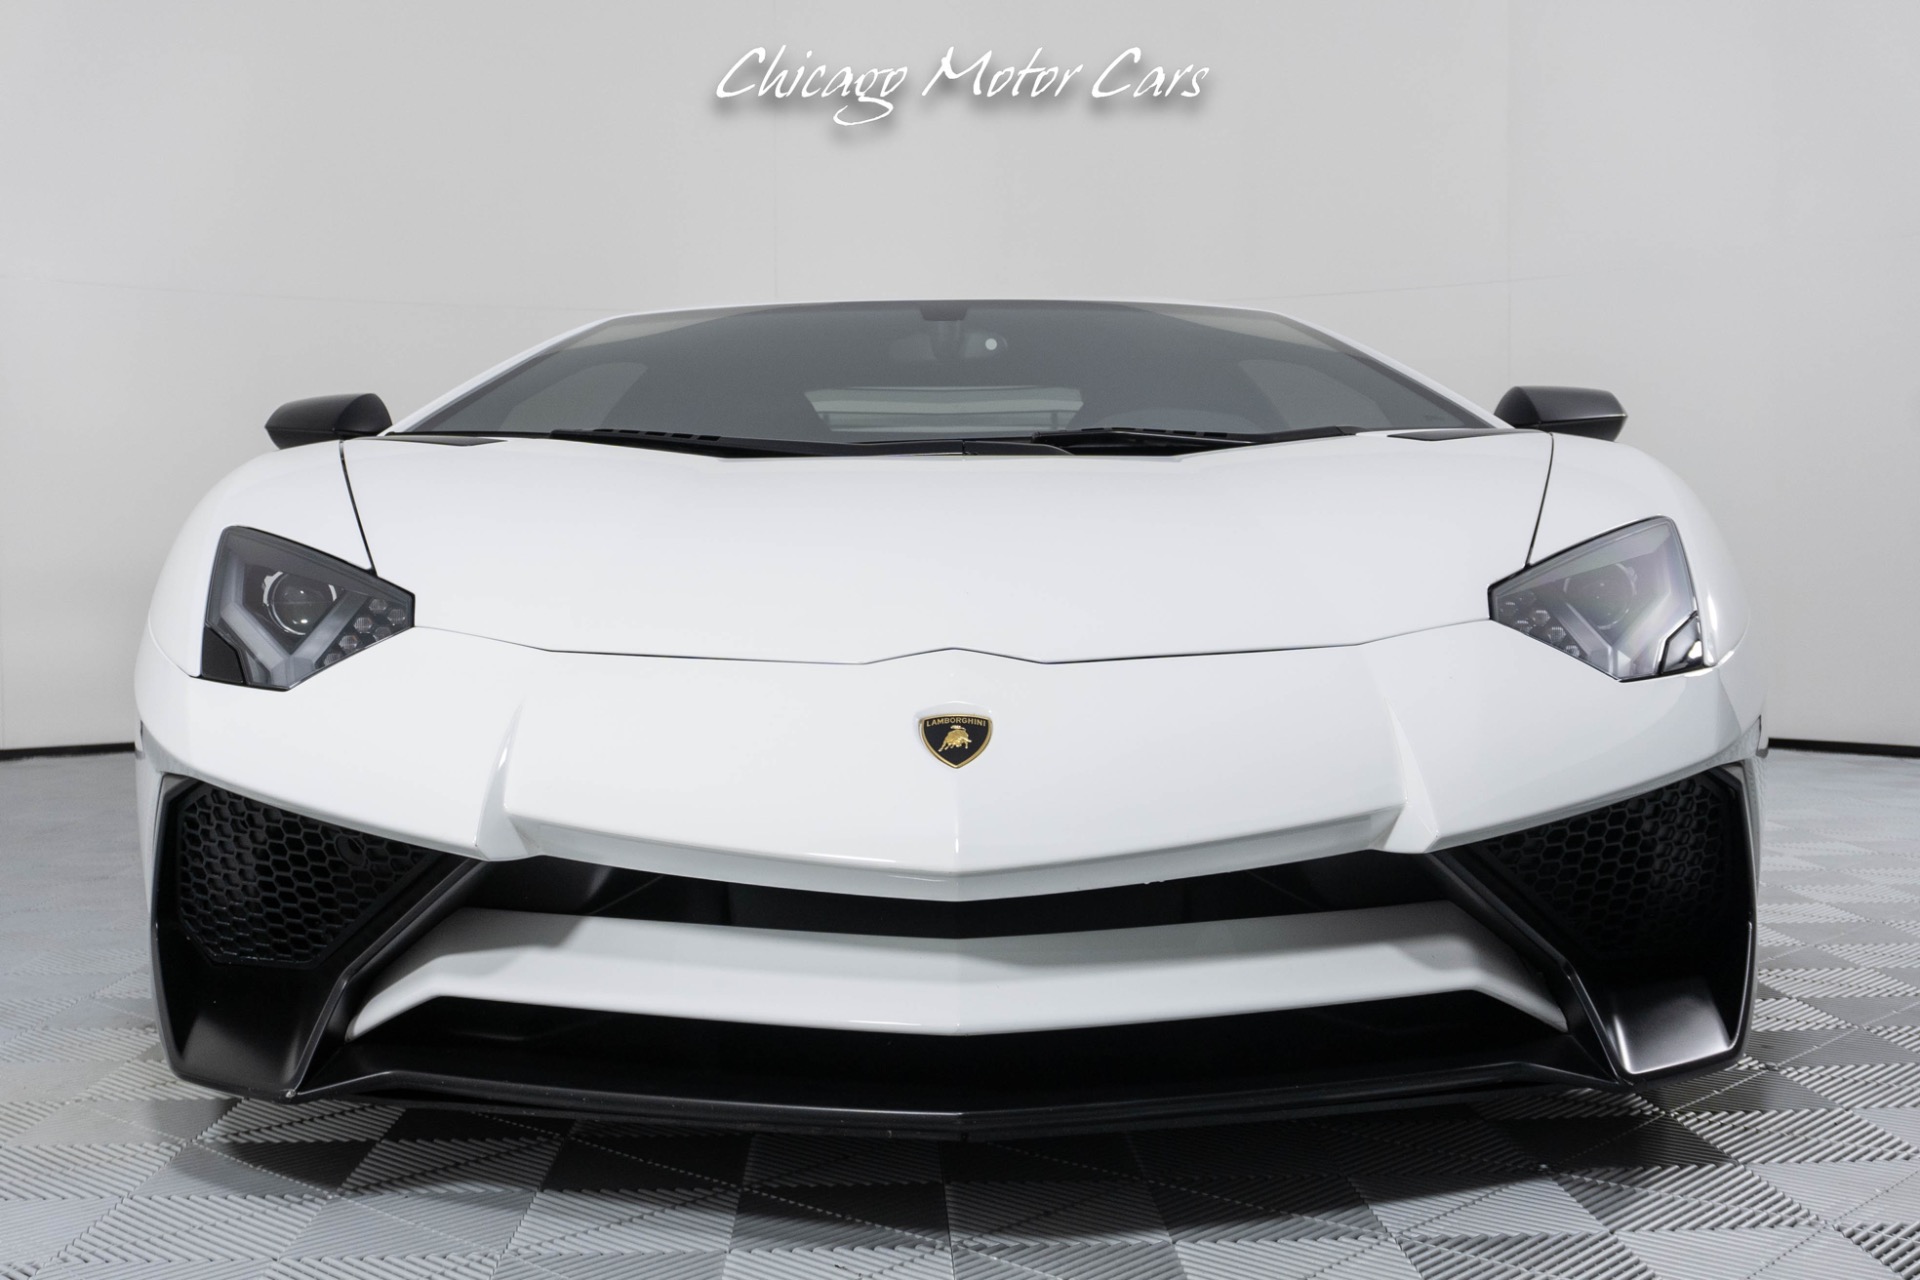 Used 2016 Lamborghini Aventador LP 750-4 SV RACING EXHAUST CARBON FIBER  REAR SPOILER DIANTHUS WHEELS For Sale (Special Pricing) | Chicago Motor  Cars Stock #GLA04479-SS